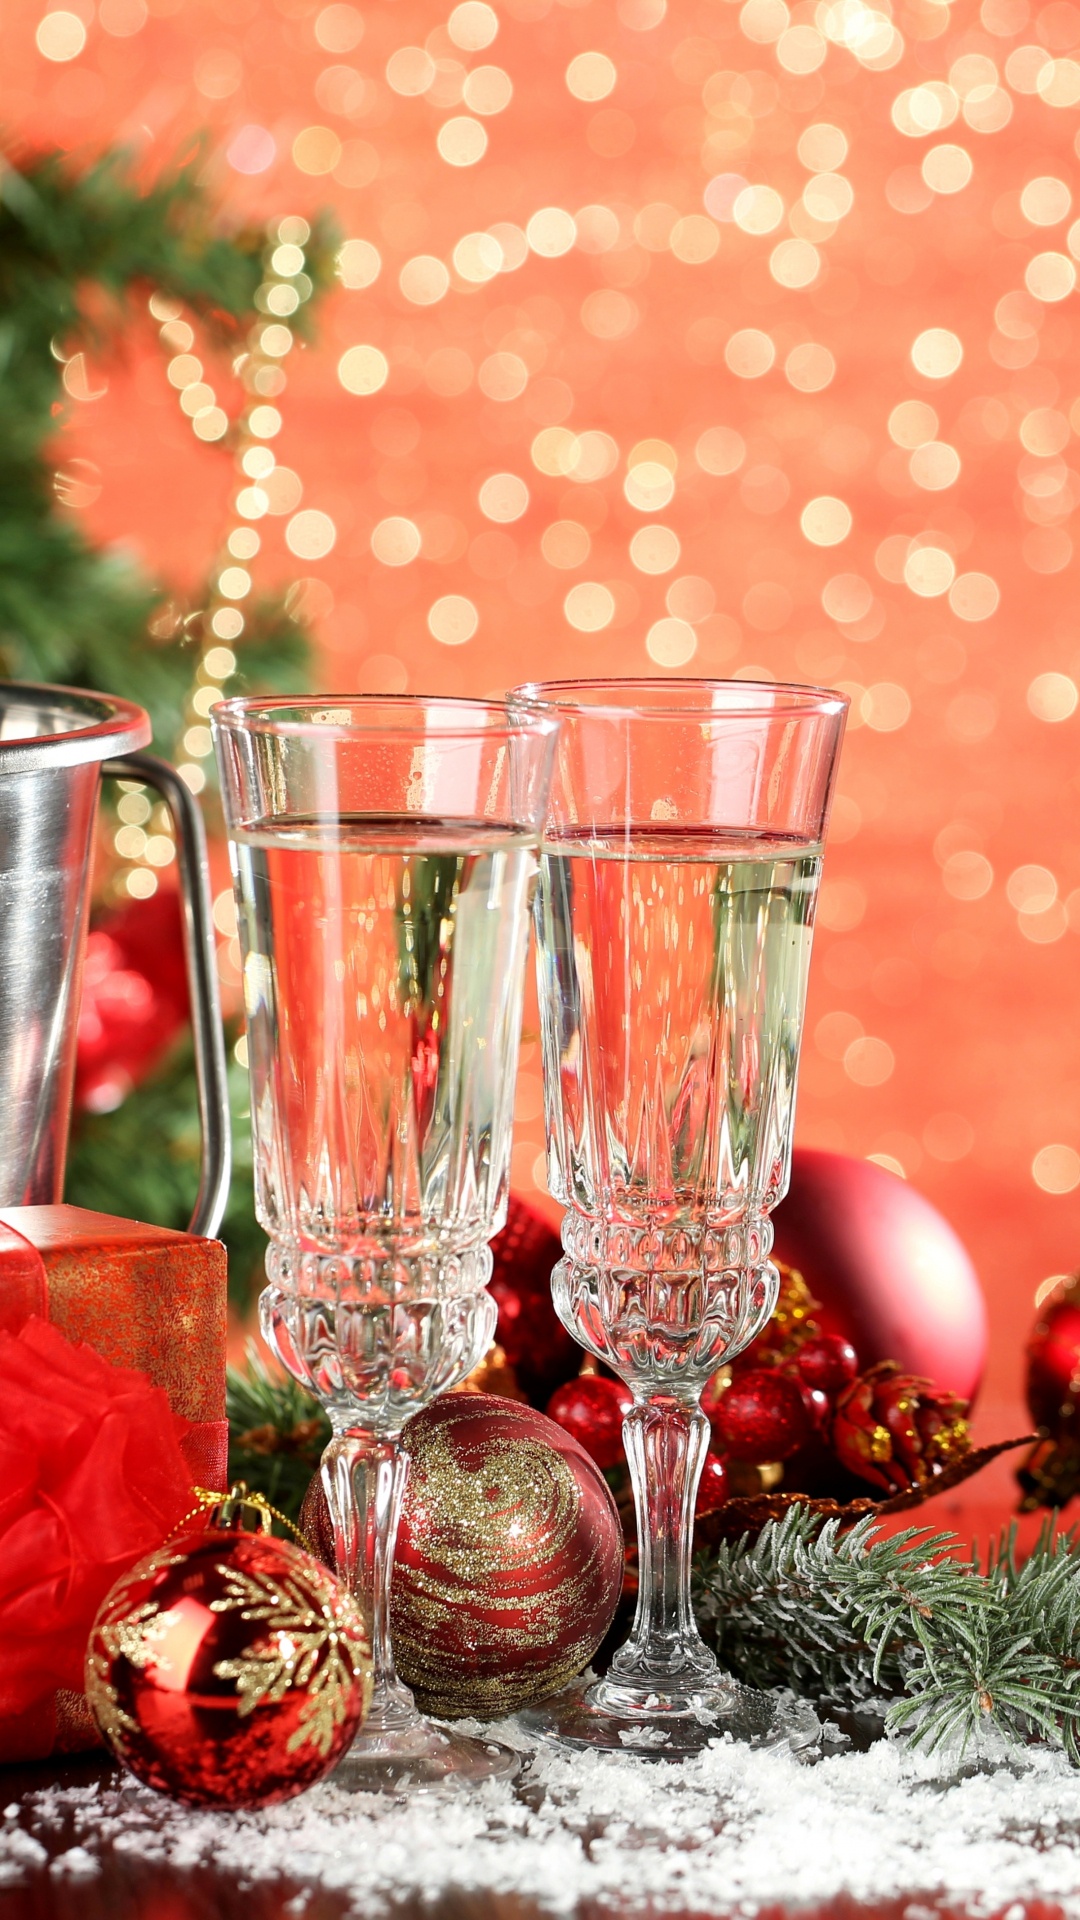 Champagne, New Year, Christmas Ornament, Christmas Decoration, Christmas. Wallpaper in 1080x1920 Resolution